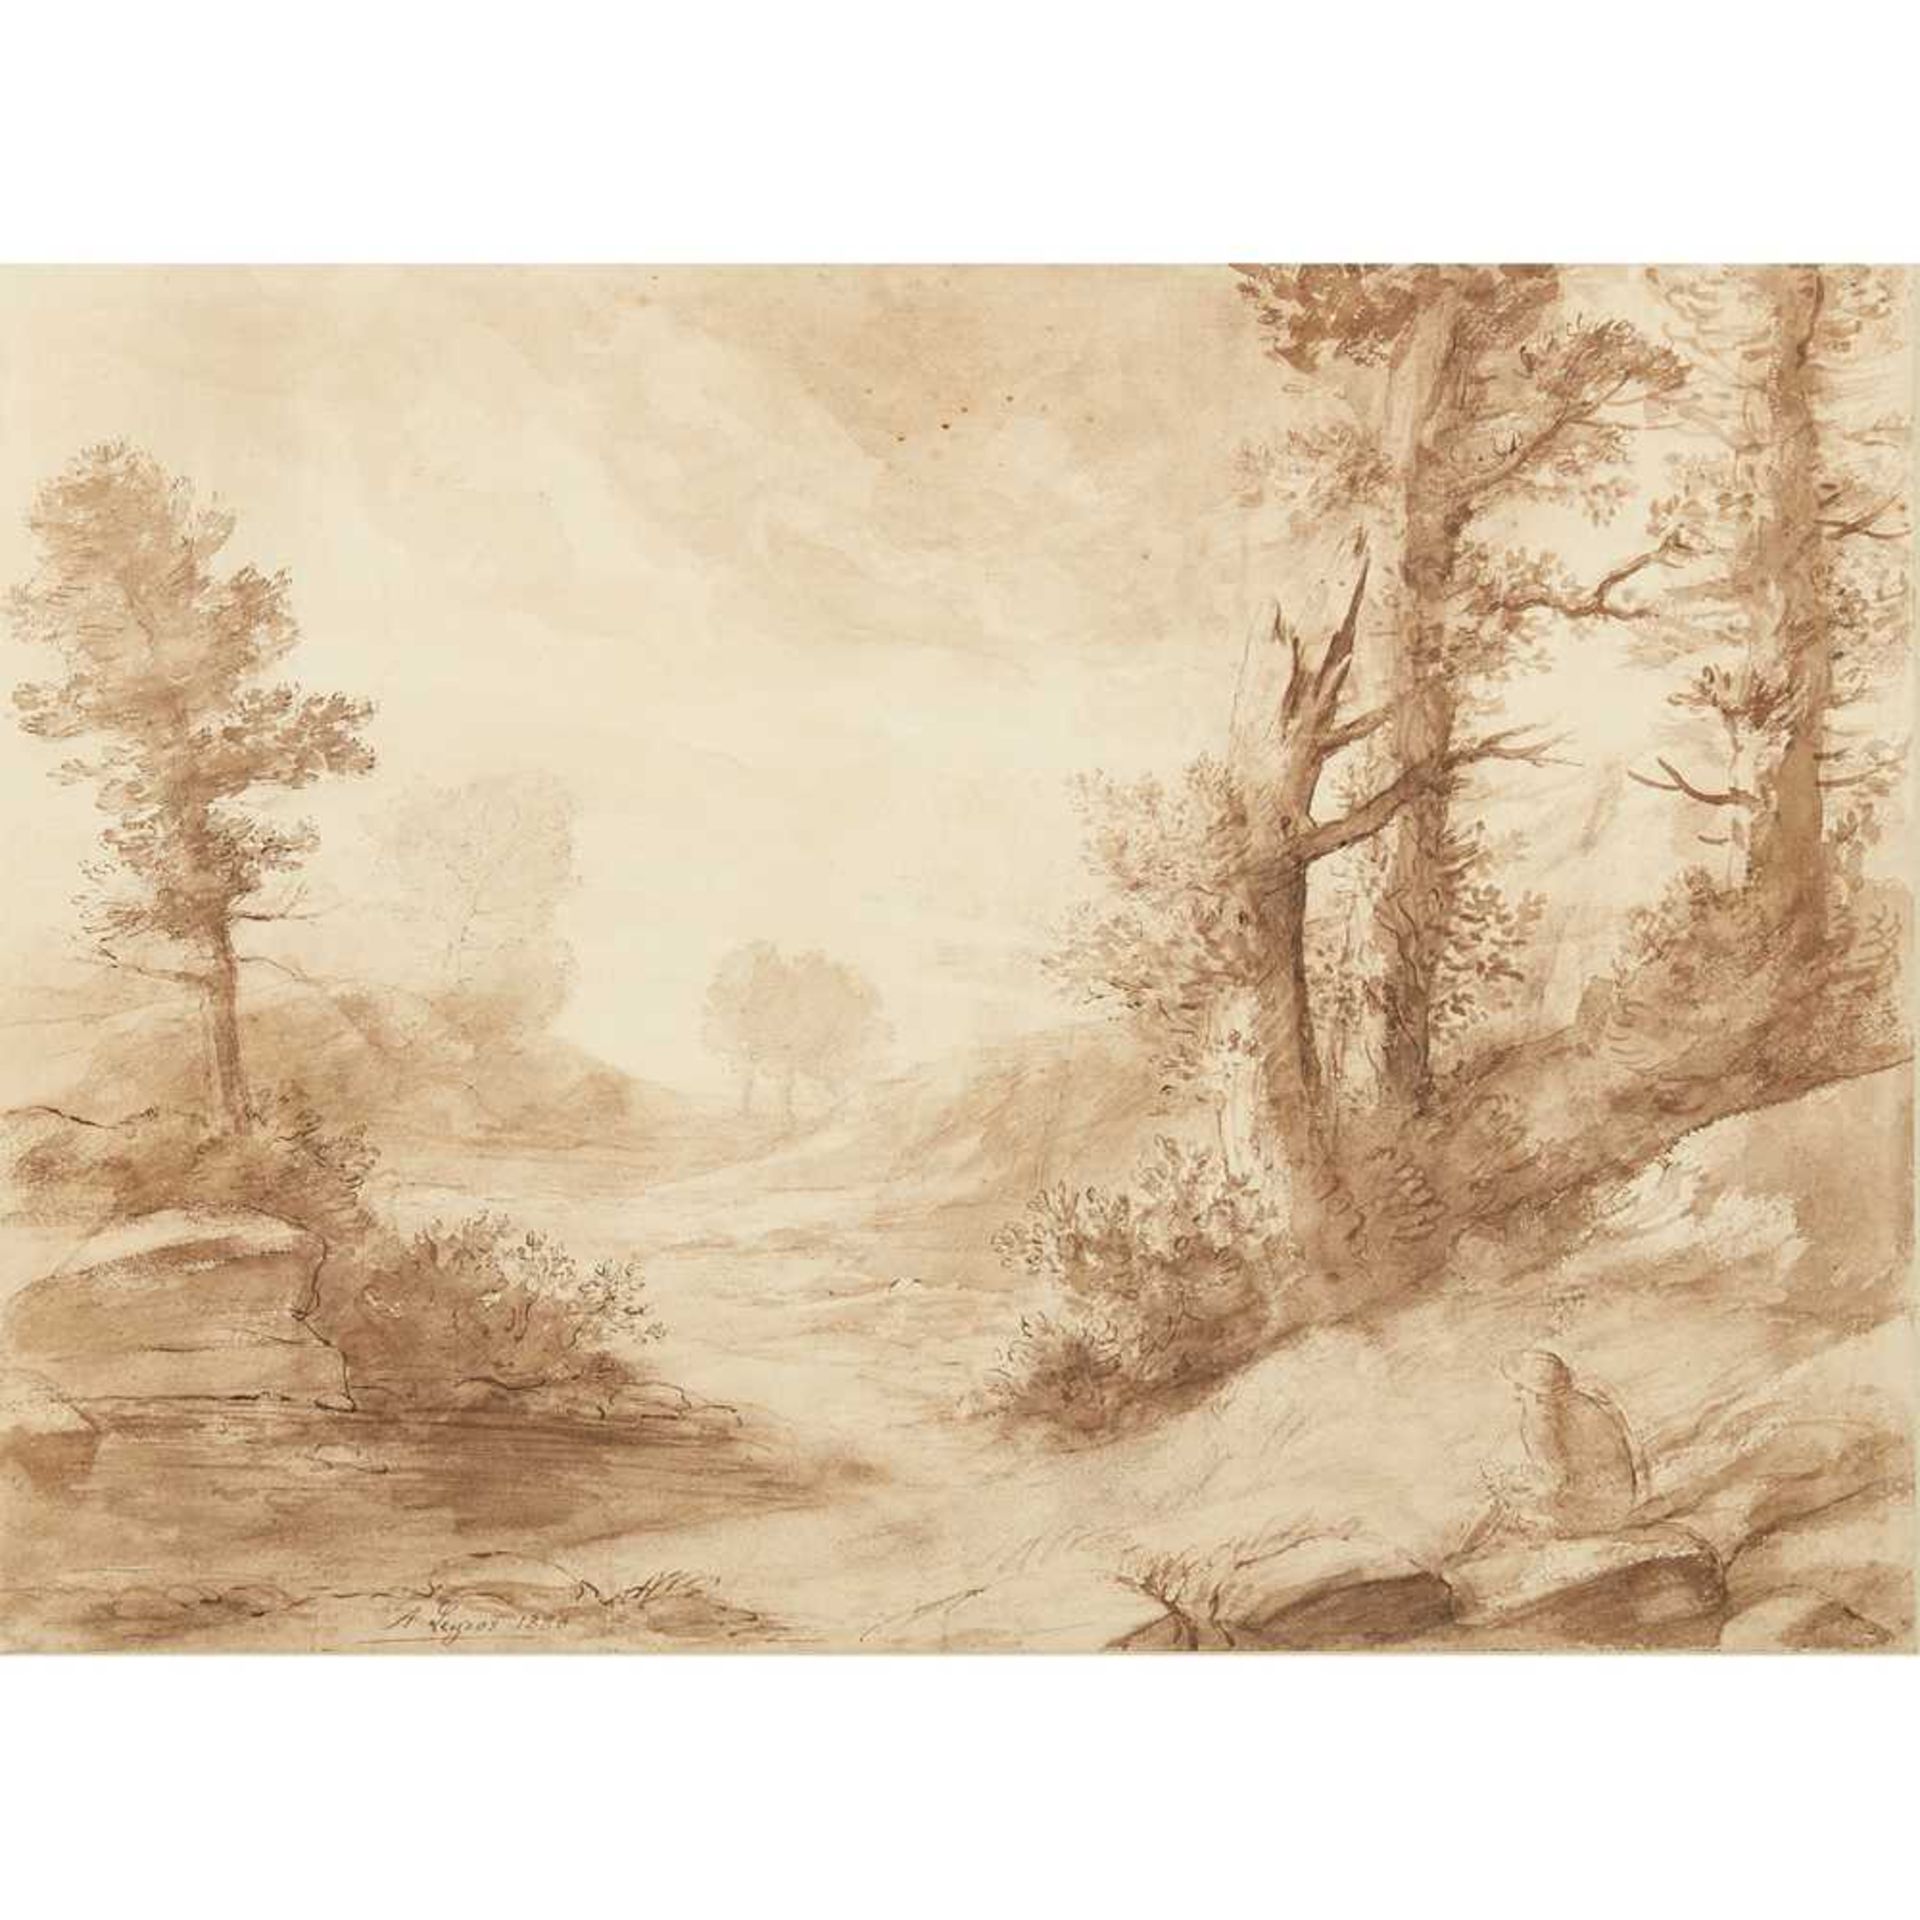 ALPHONSE LEGROS (FRENCH 1837-1911) A WOODED LANDSCAPE WITH FIGURE SKETCHING